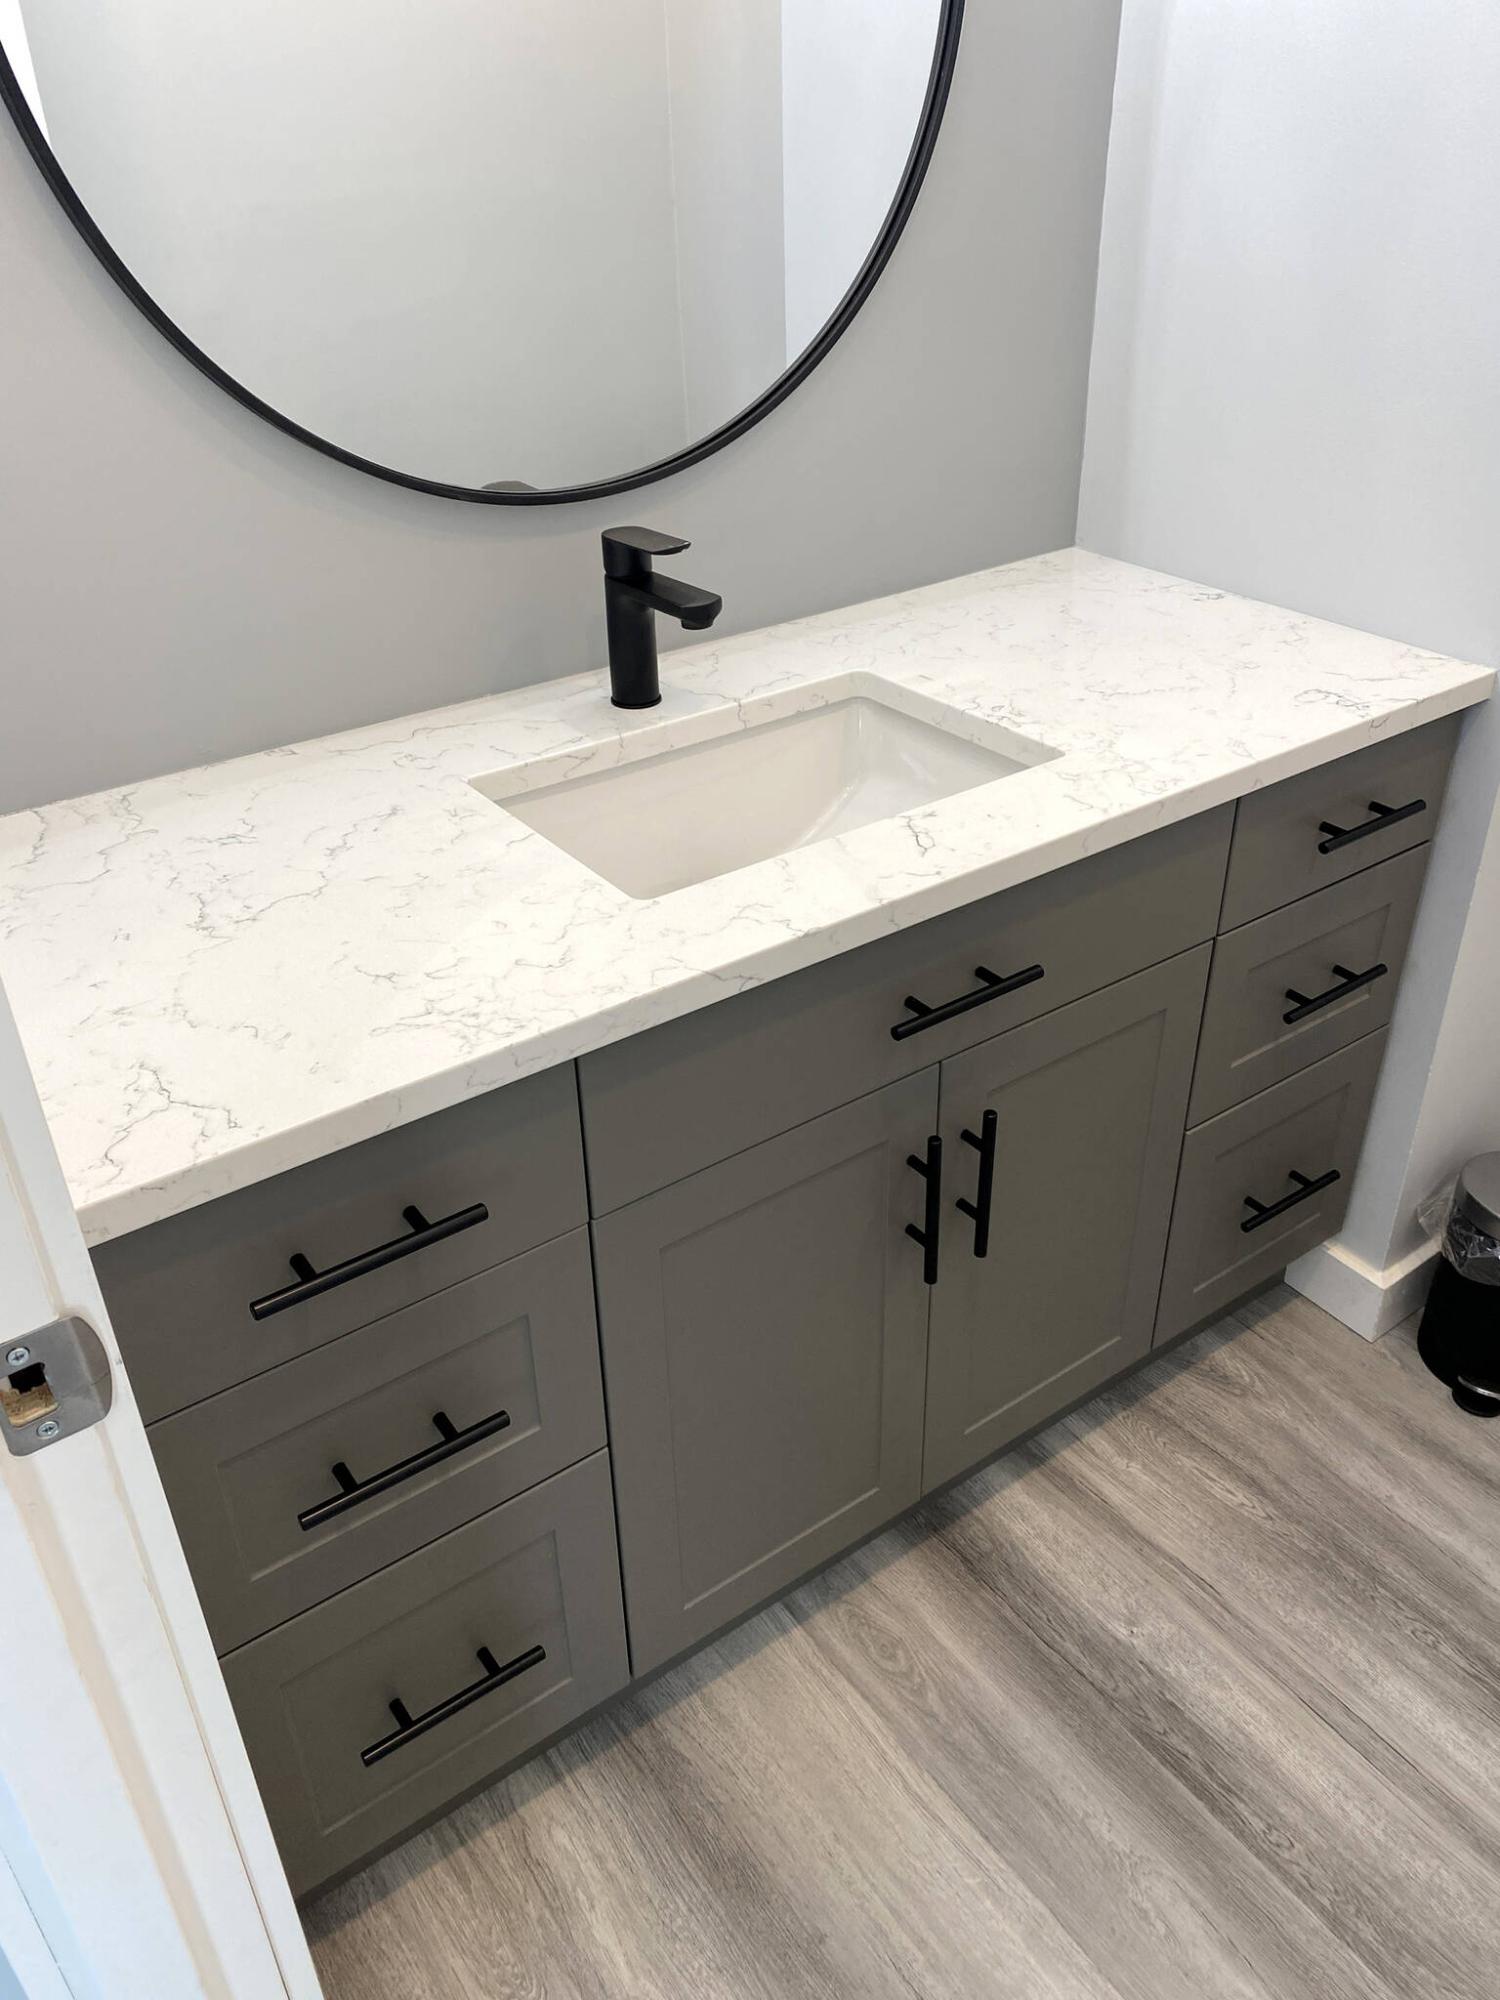  <p>Photos by Marc LaBossiere / Winnipeg Free Press</p>
                                <p>A custom vanity was ordered to fill the non-standard 52.5-inch cavity inset, topped with a quartz countertop and new sink.</p> 